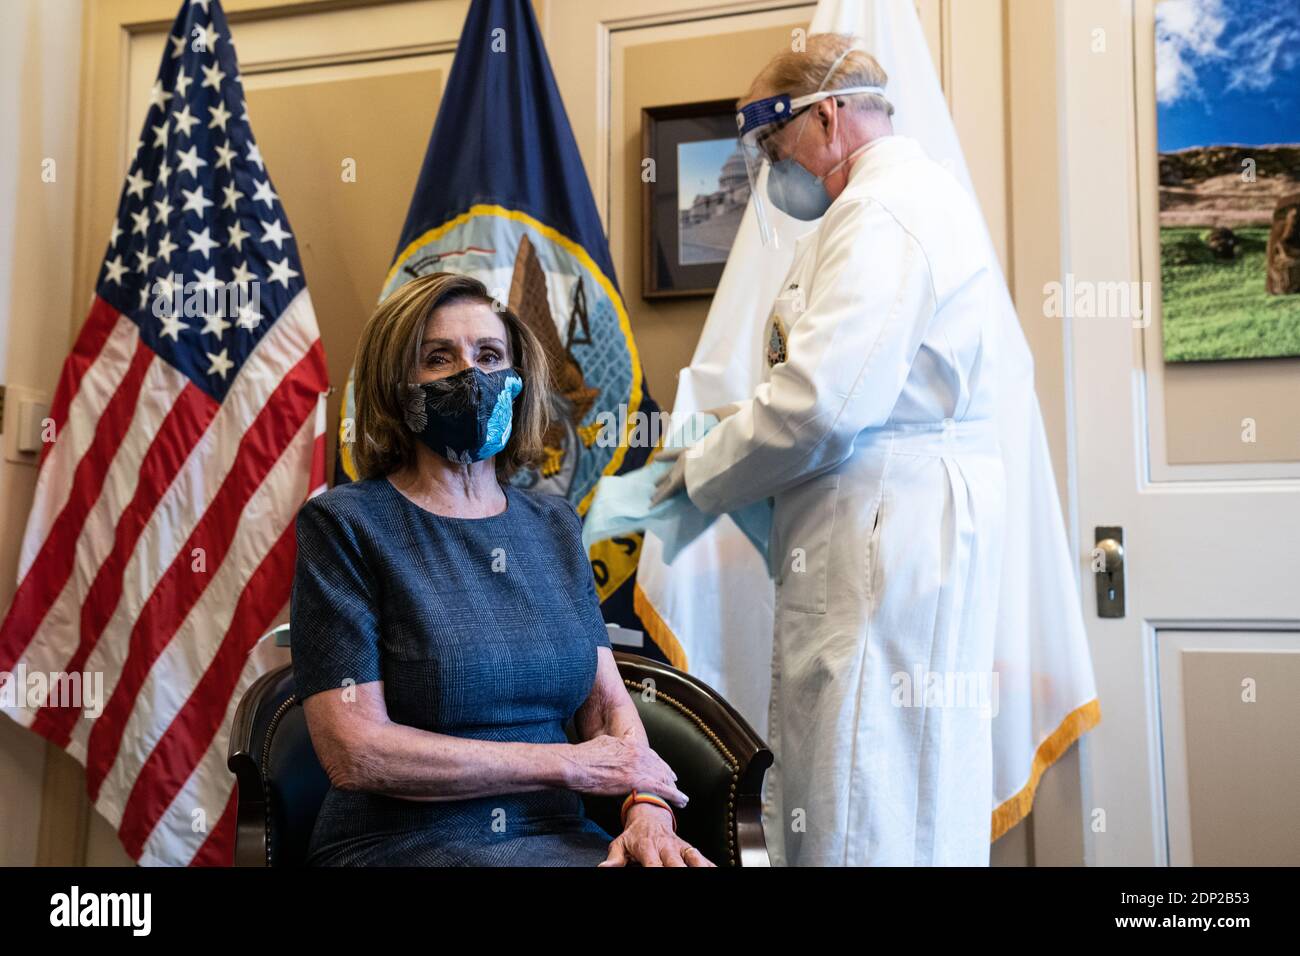 Speaker of the United States House of Representatives Nancy Pelosi (Democrat of California), sits and waits before being inoculated with the Pfizer-Biontech COVID-19 vaccine in the US Capitol Building in Washington DC on December 18th, 2020.Credit: Anna Moneymaker/Pool via CNP /MediaPunch Stock Photo